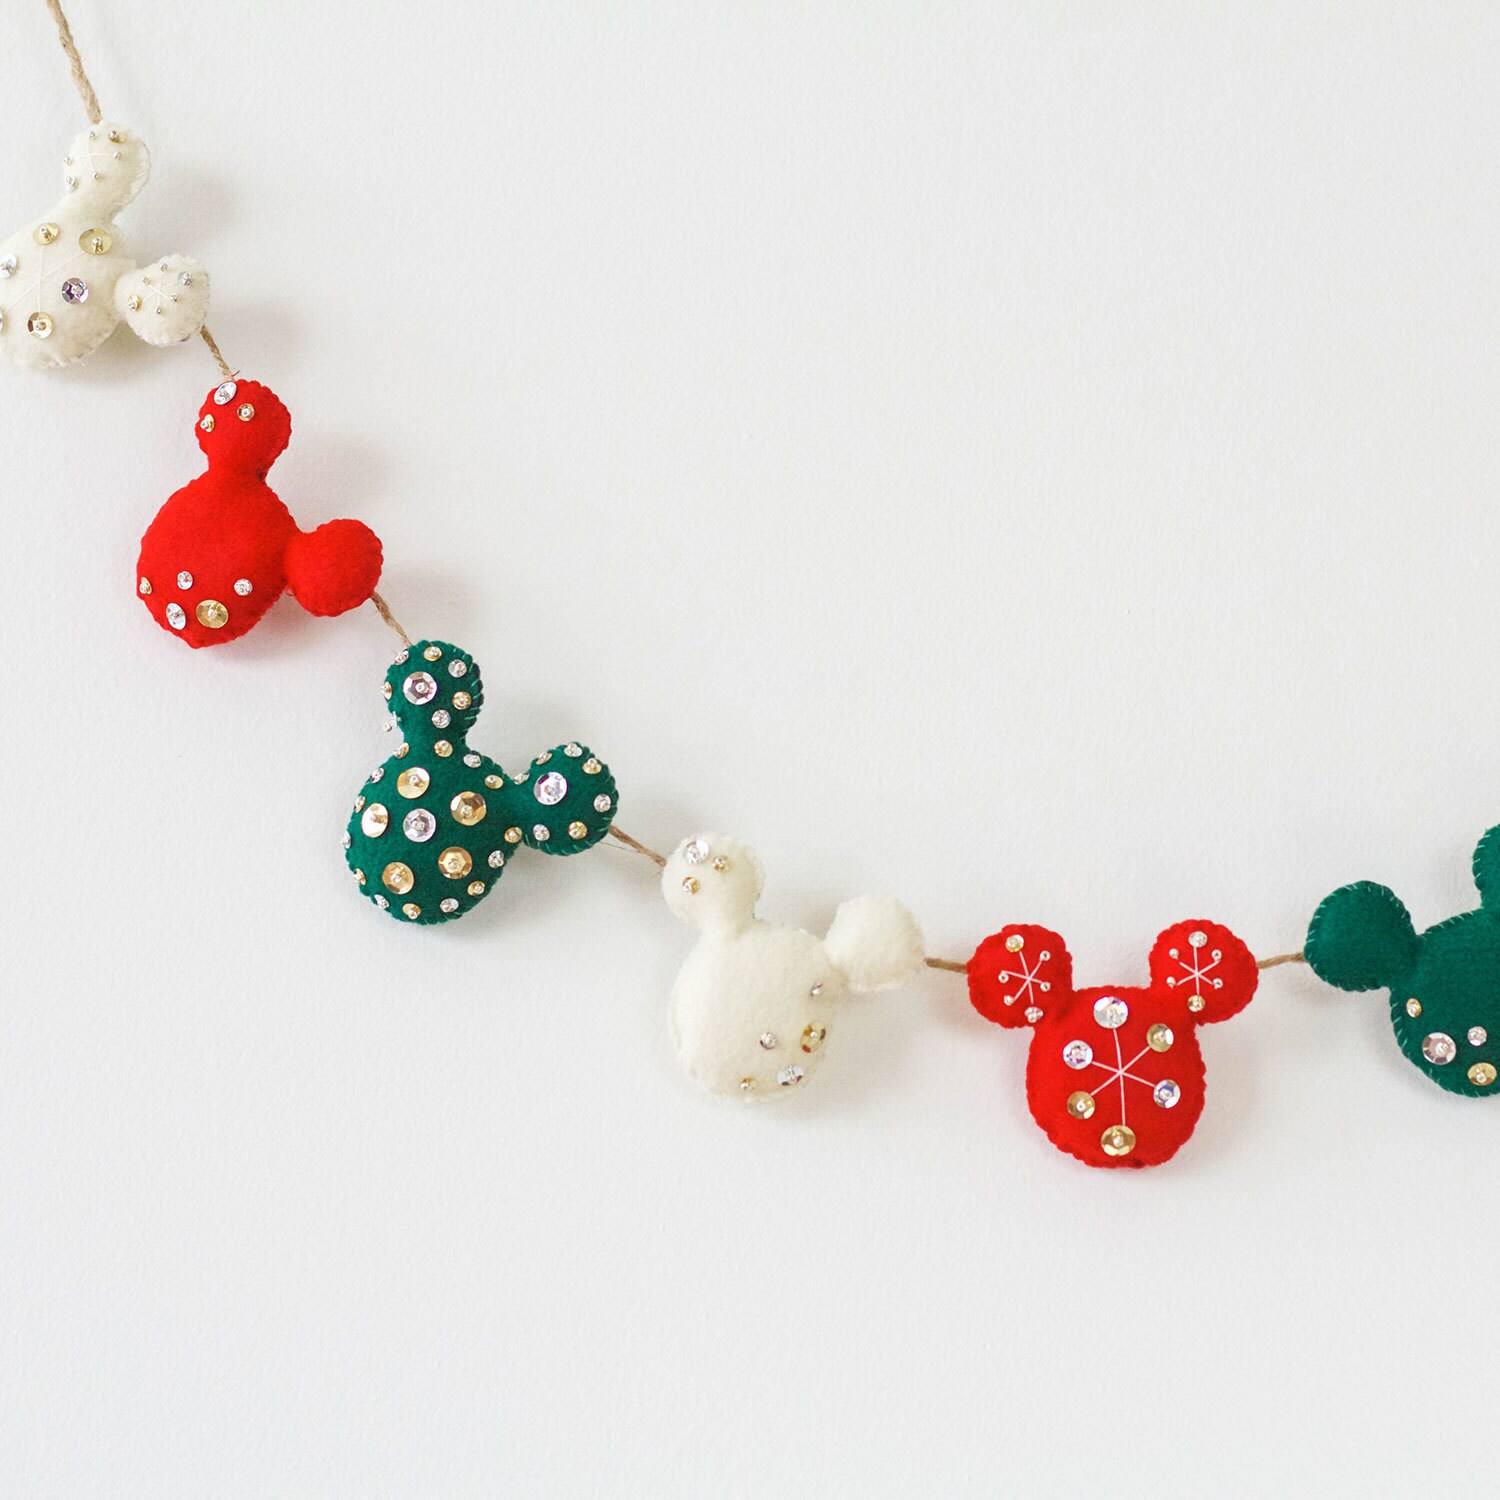 Felt Christmas themed Mickey Mouse heads decorated with sequins on a garland.